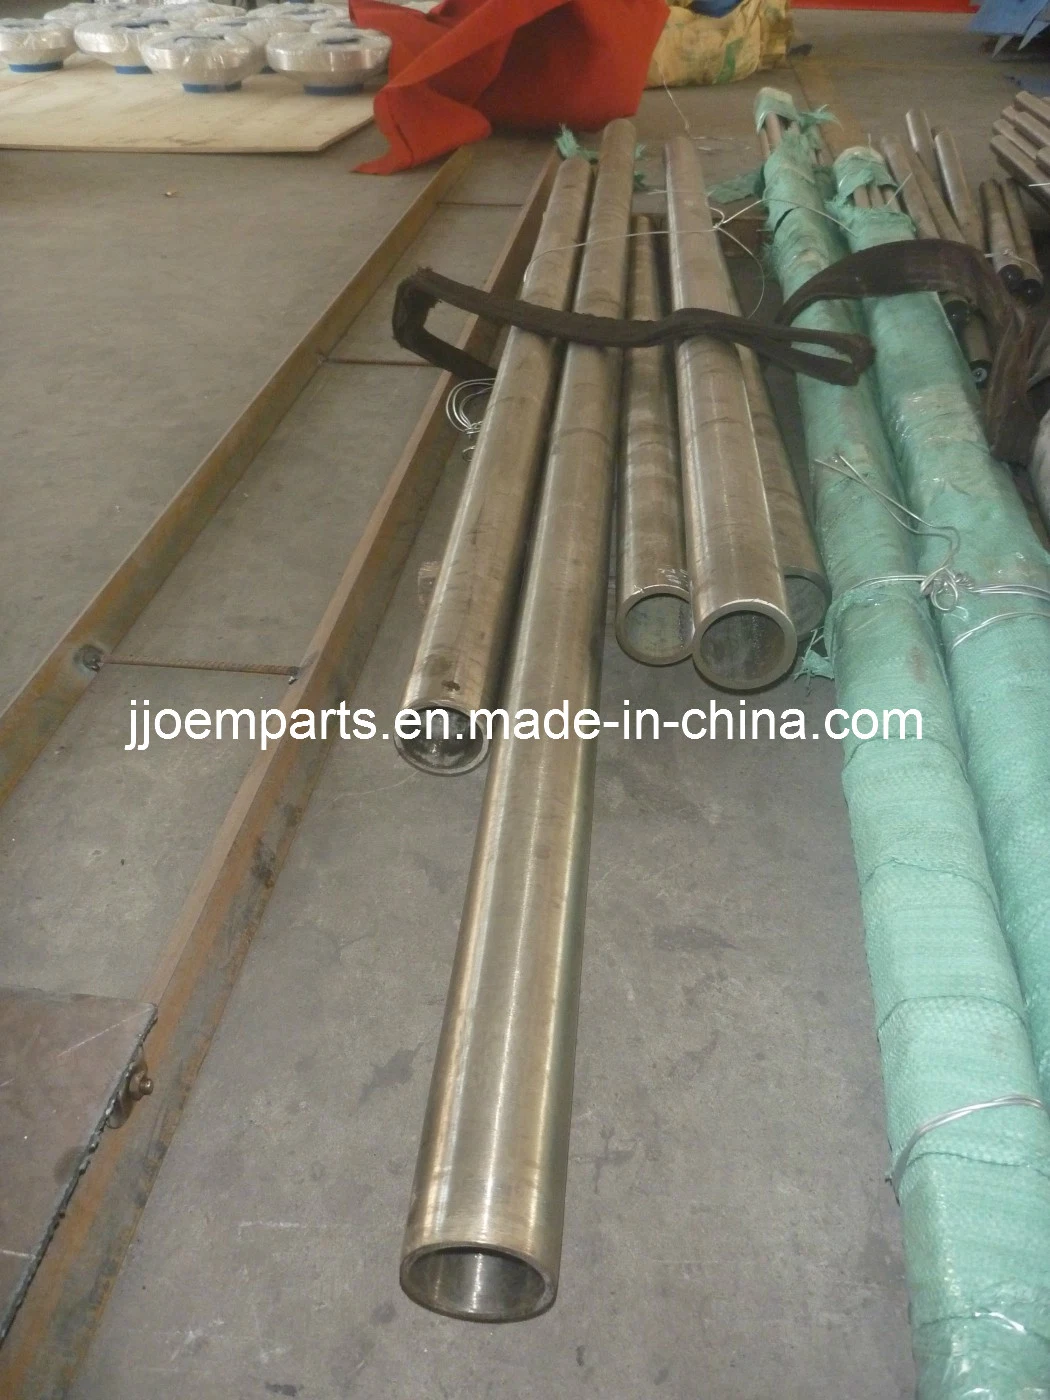 Hastelloy G-35 Seamless Pipes/Welded Pipes (UNS N06035, 2.4643, Alloy G-35, Hastelloy G35)